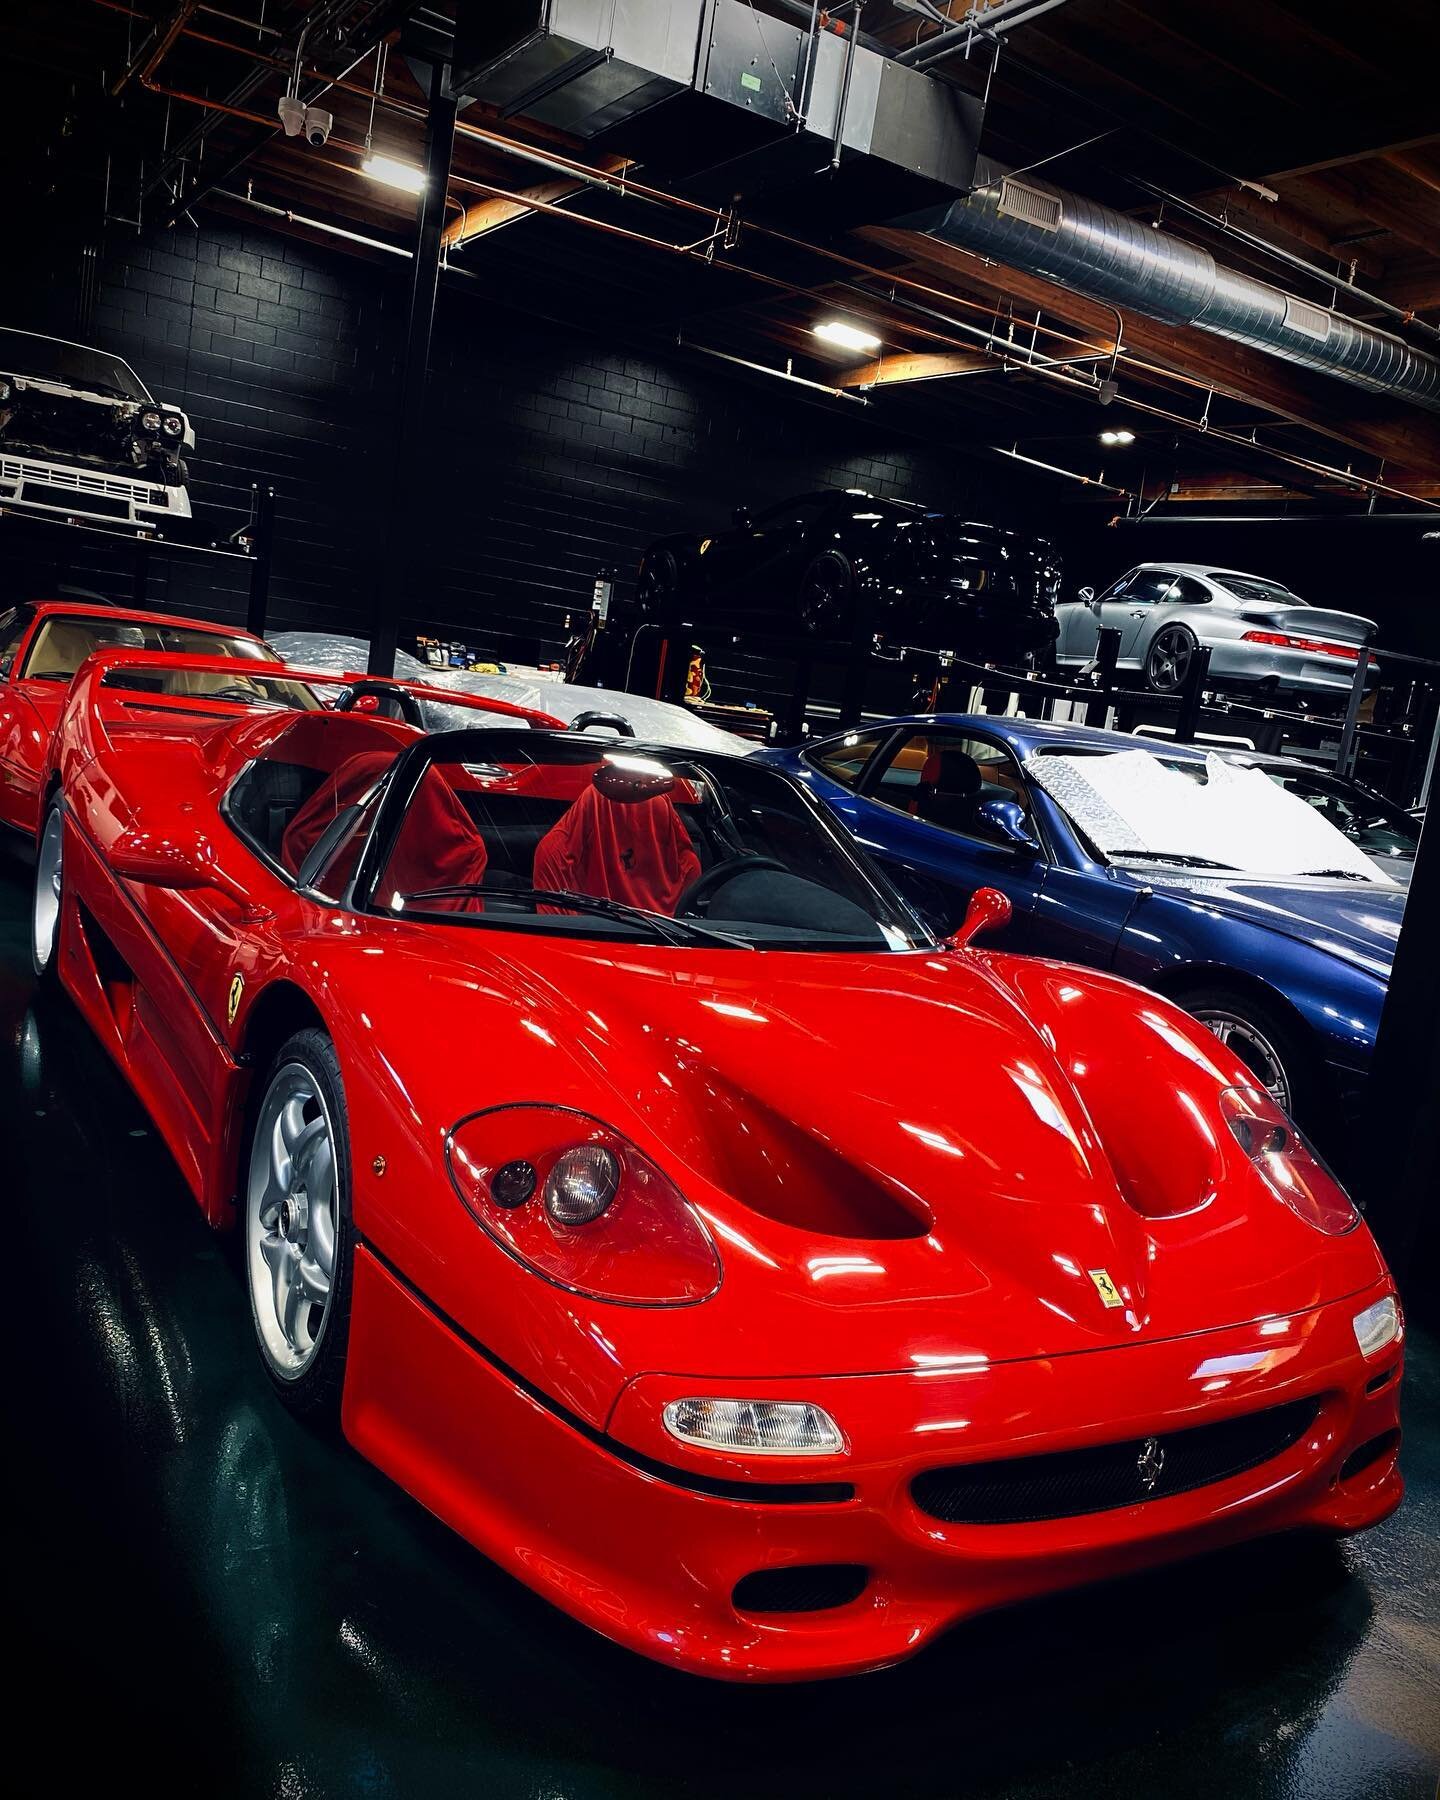 Undoubtedly one of our favorites 
#issimimeccanica #issimi #ferrari #f50